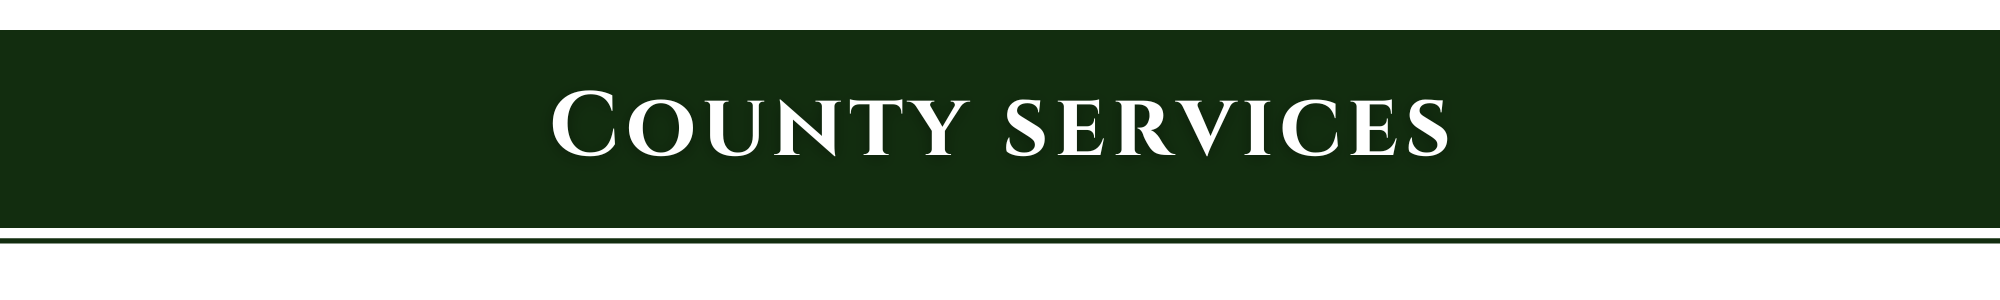 county services